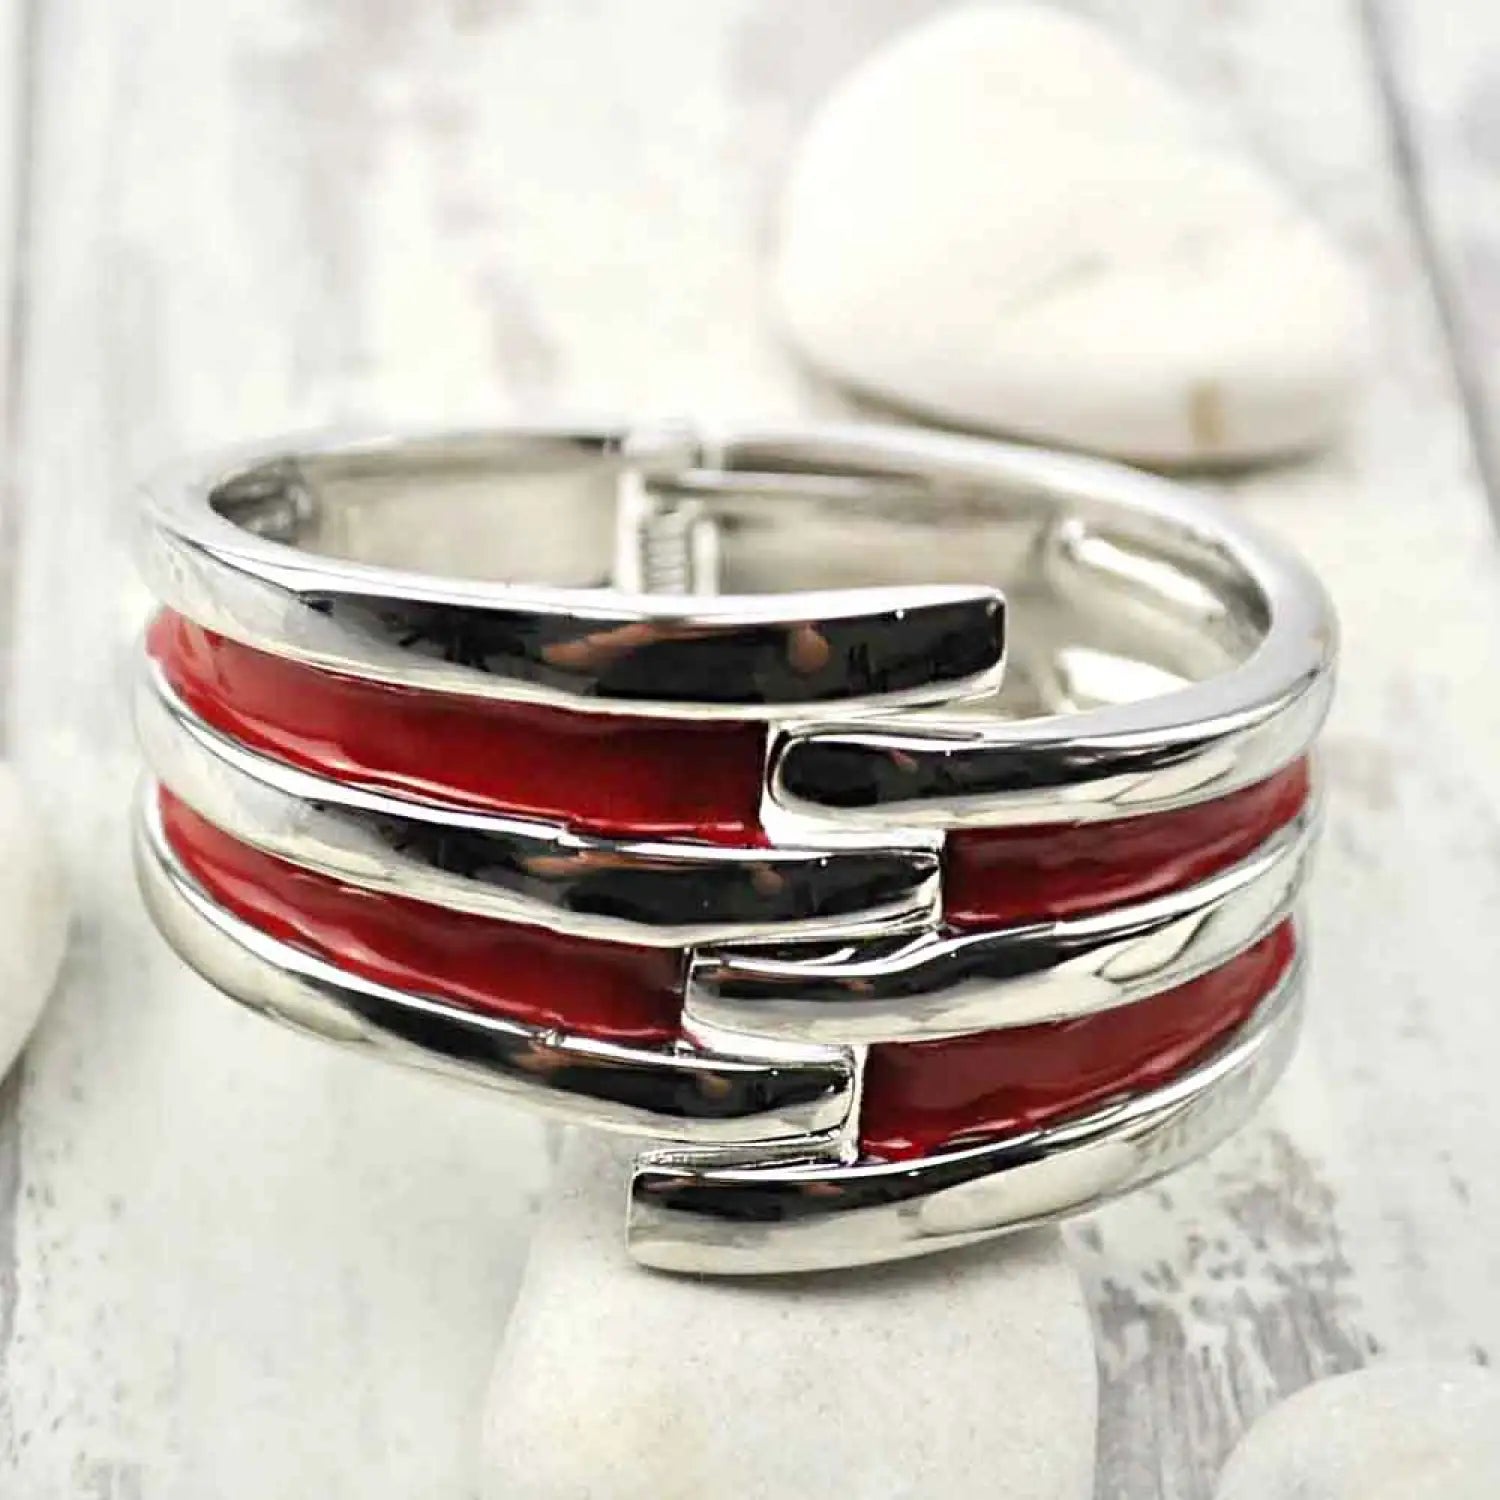 Vintage-inspired red and silver heart ring on striped metal hinged bangle